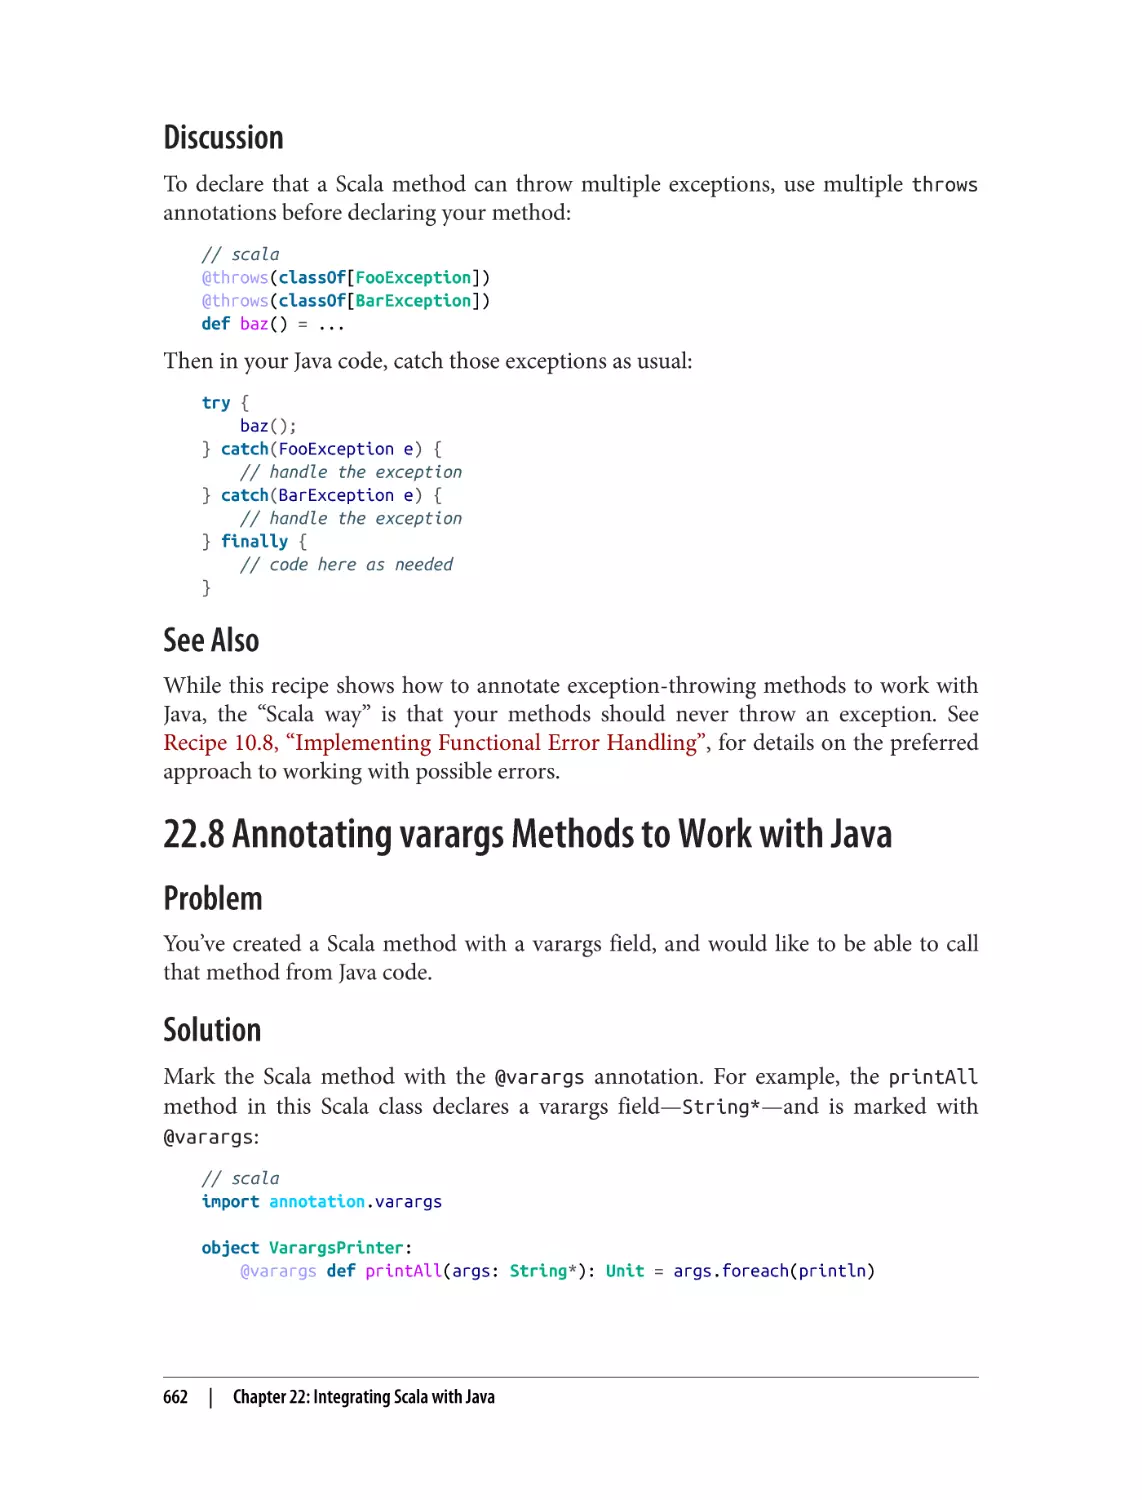 Discussion
See Also
22.8 Annotating varargs Methods to Work with Java
Problem
Solution